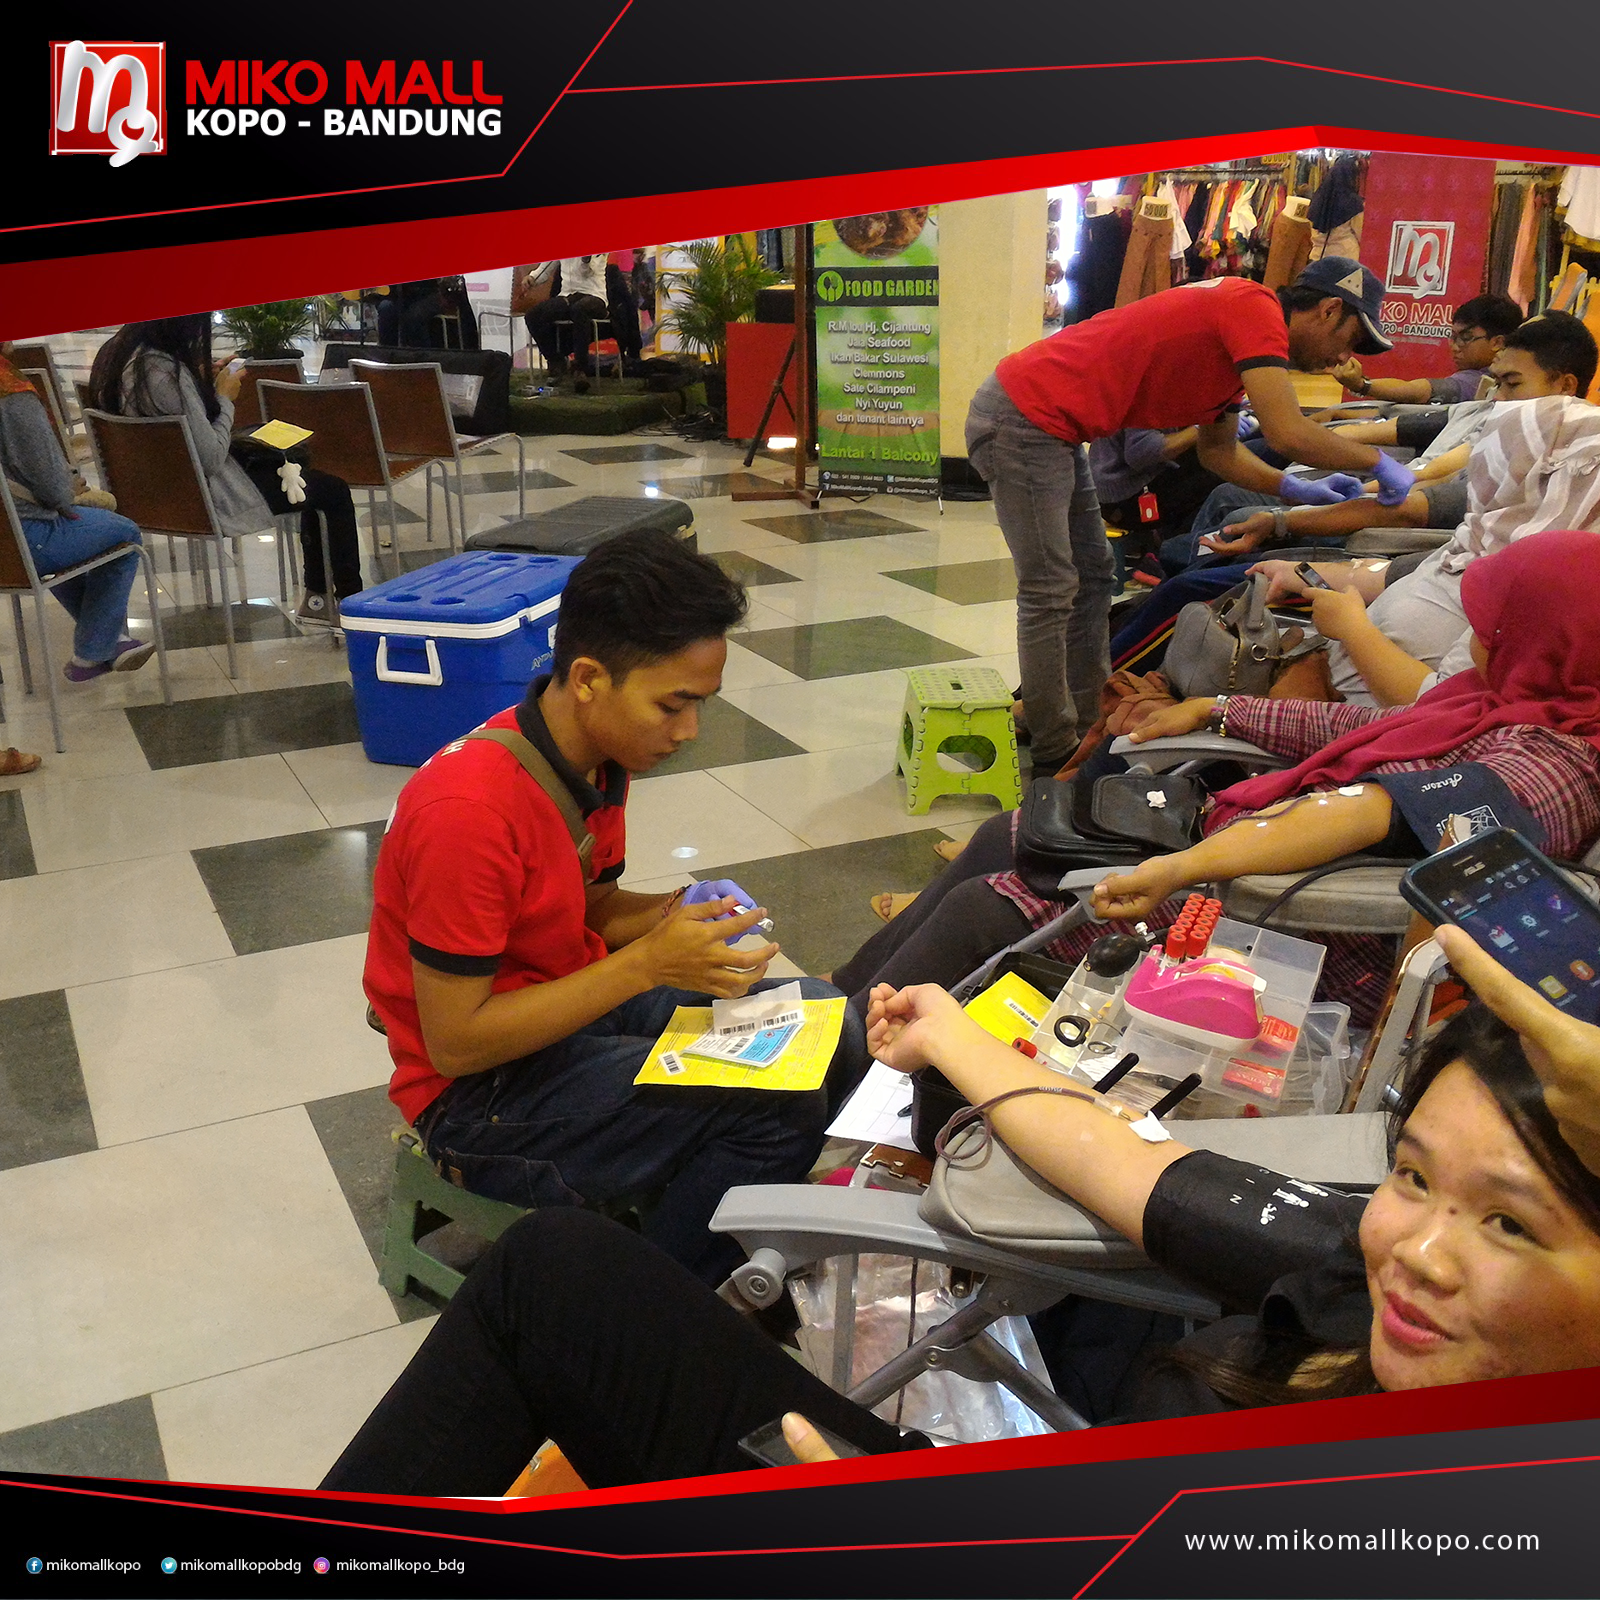 You are currently viewing DONOR DARAH DI MIKO MALL KOPO